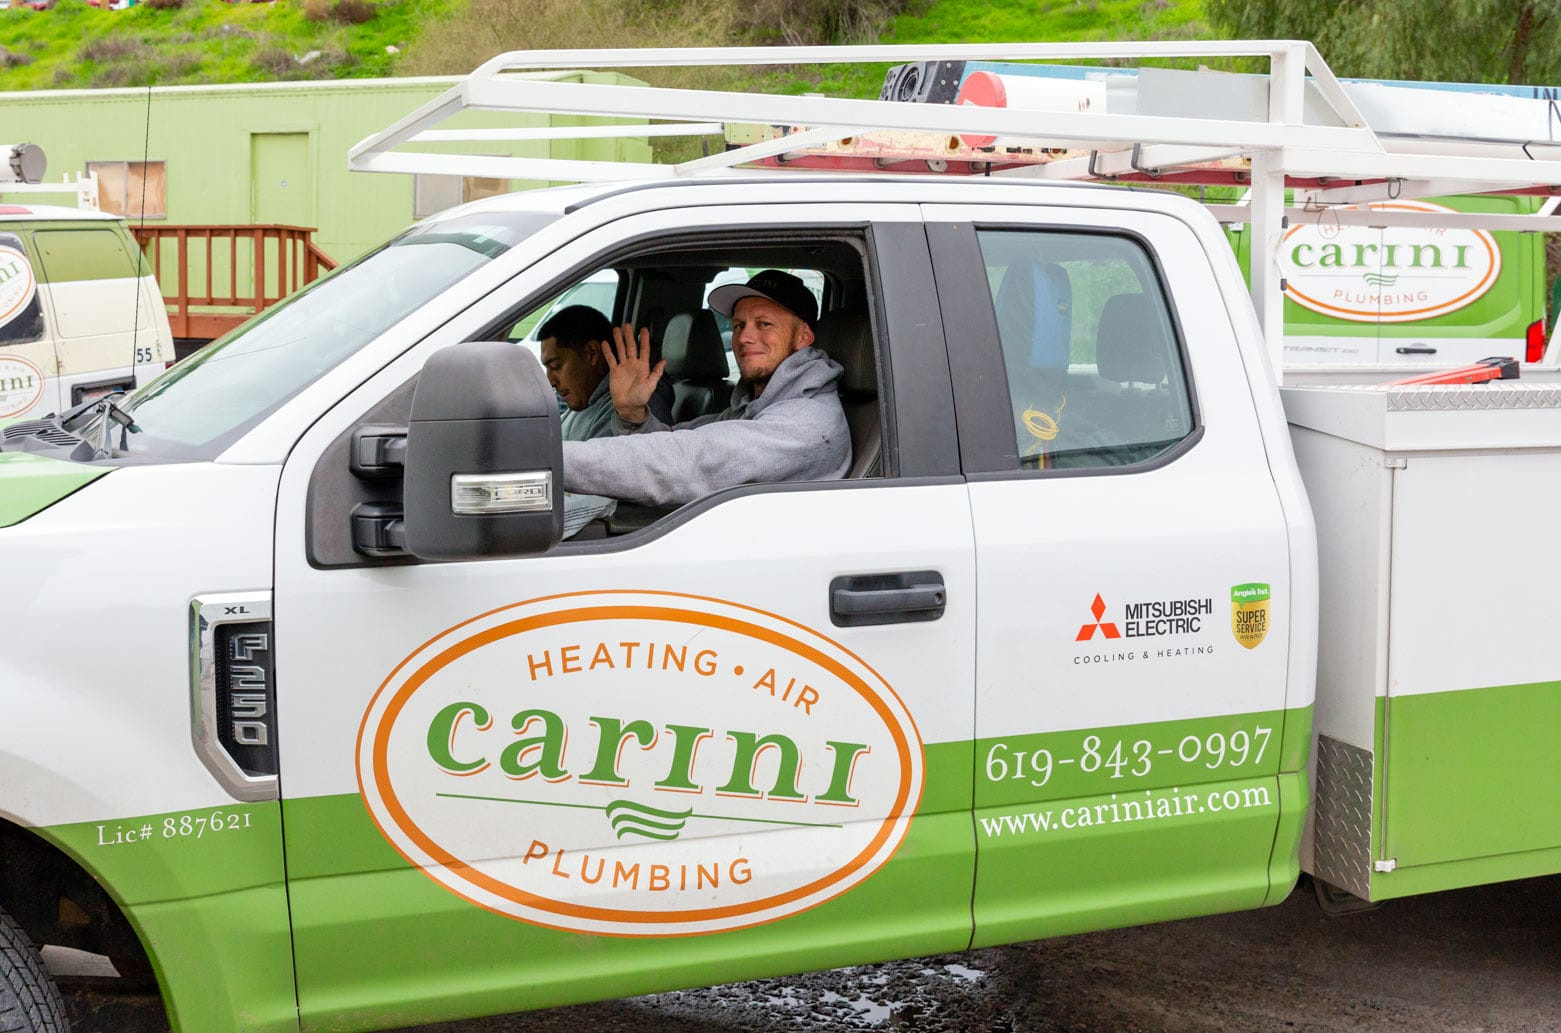 Carini Heating, Air and Plumbing Van with Electricians